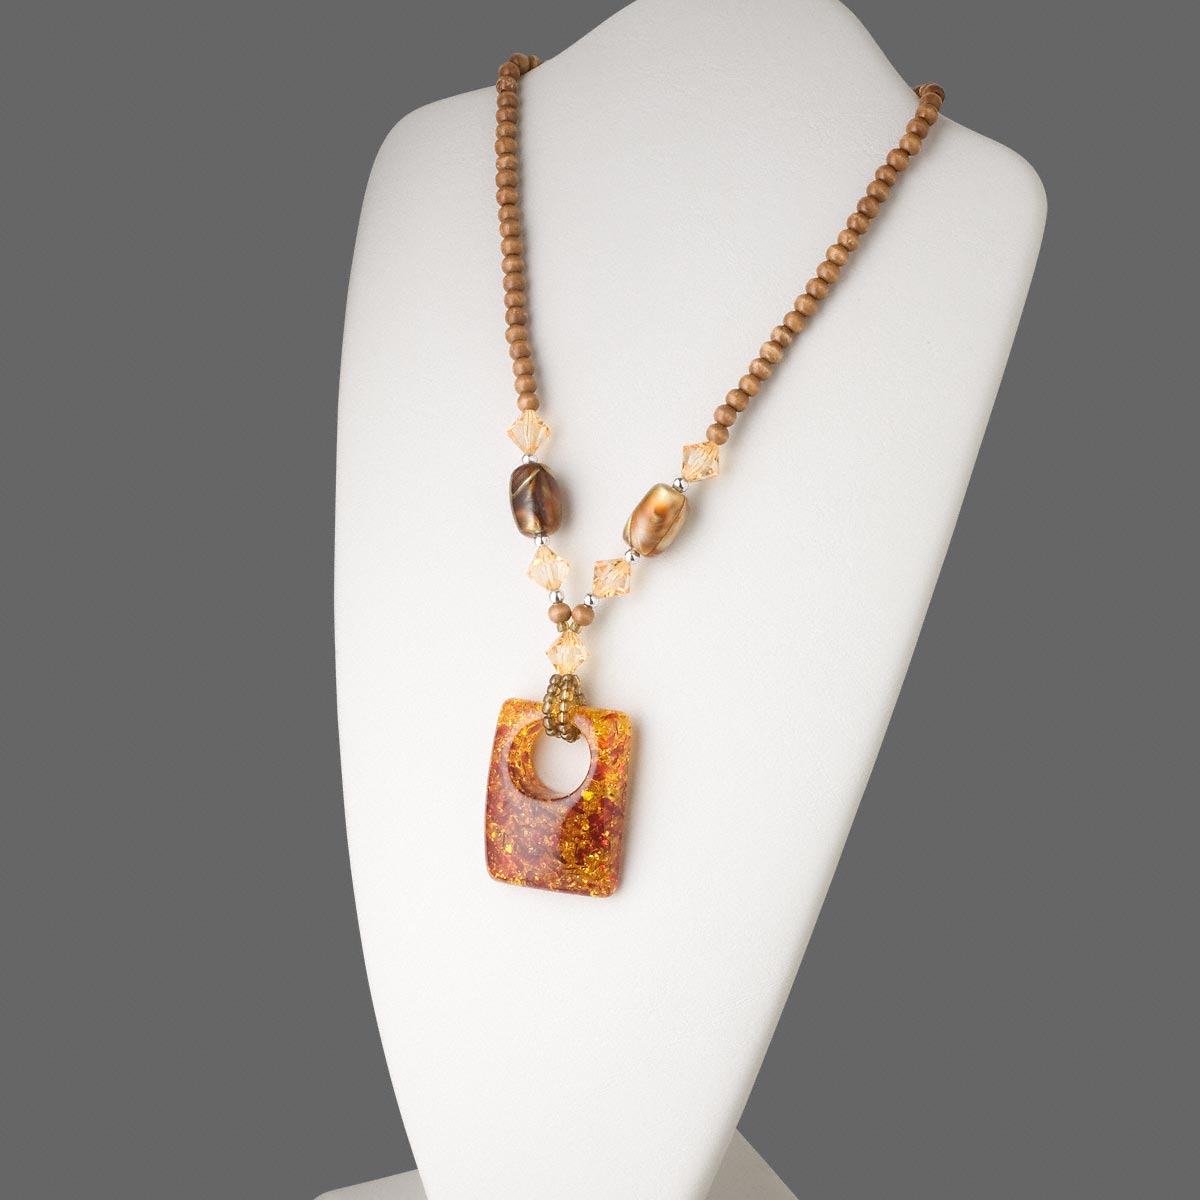 Necklace, wood and acrylic, amber yellow / brown / peach, 57x24mm ...